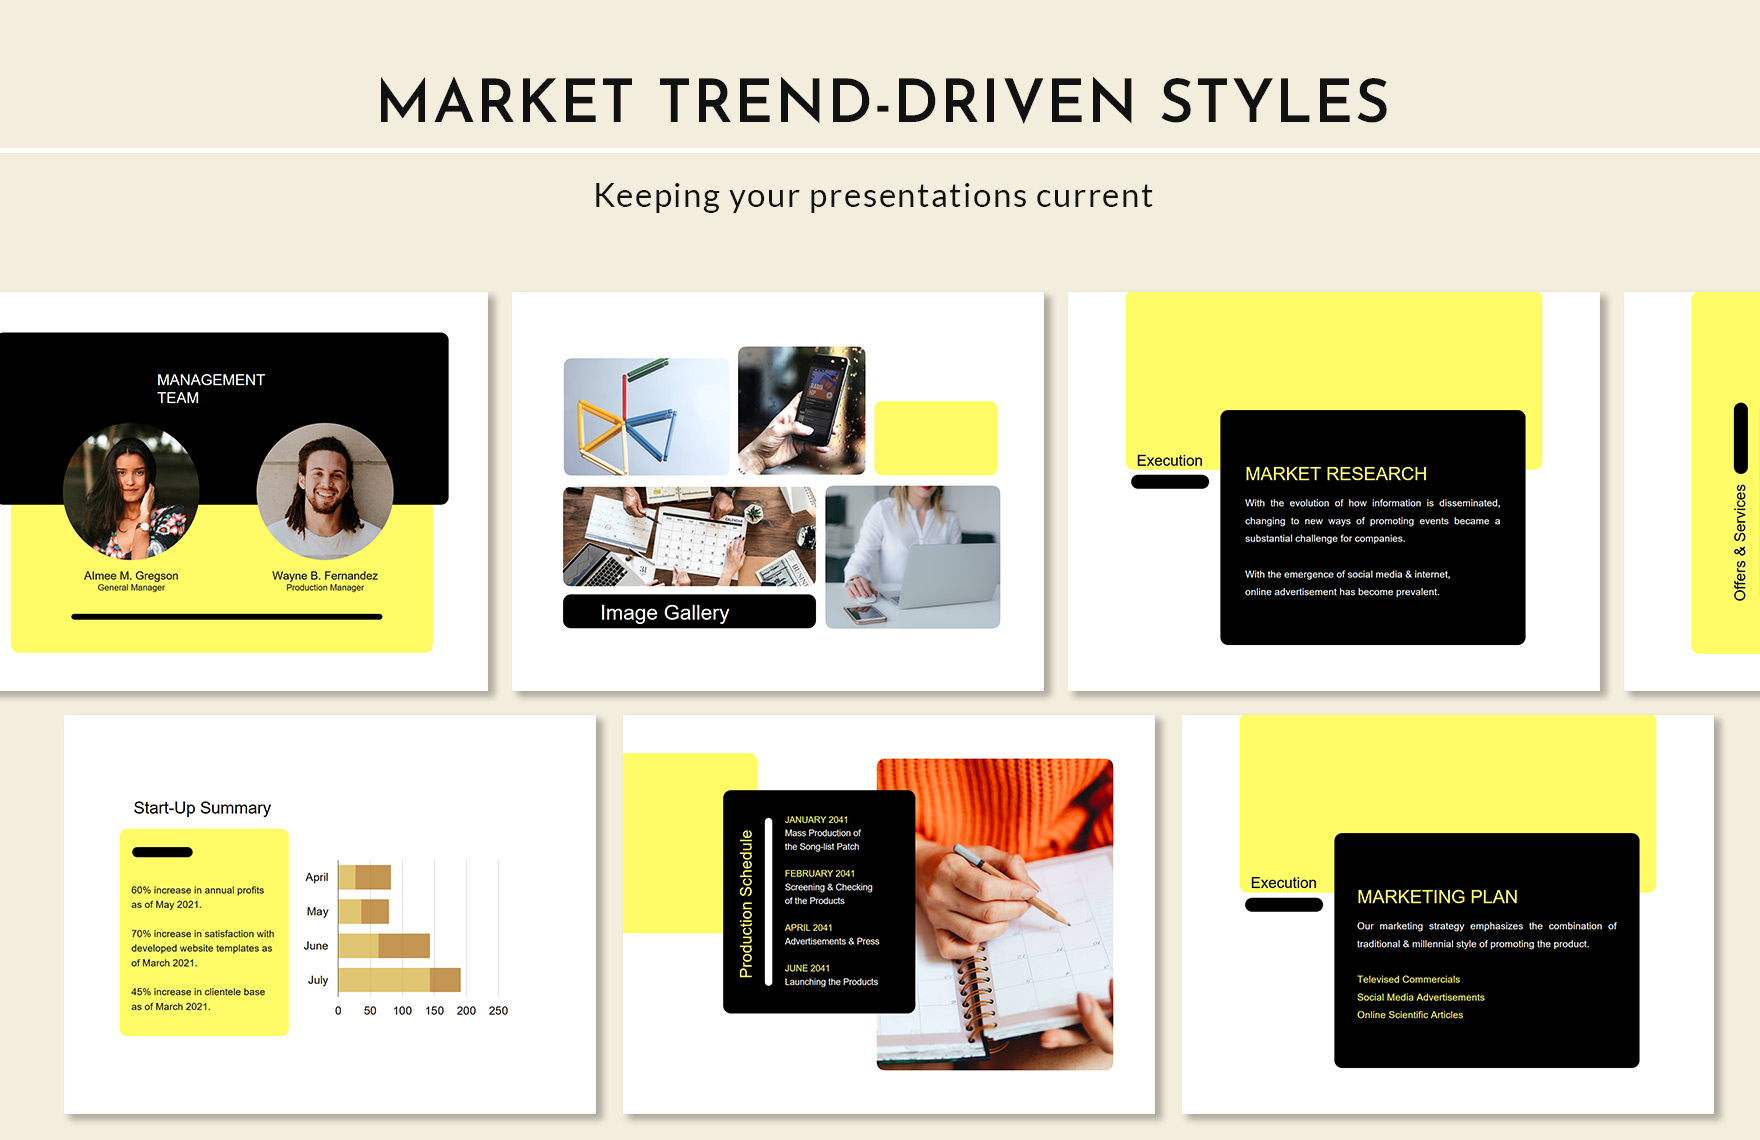 Business Pitch Deck Template